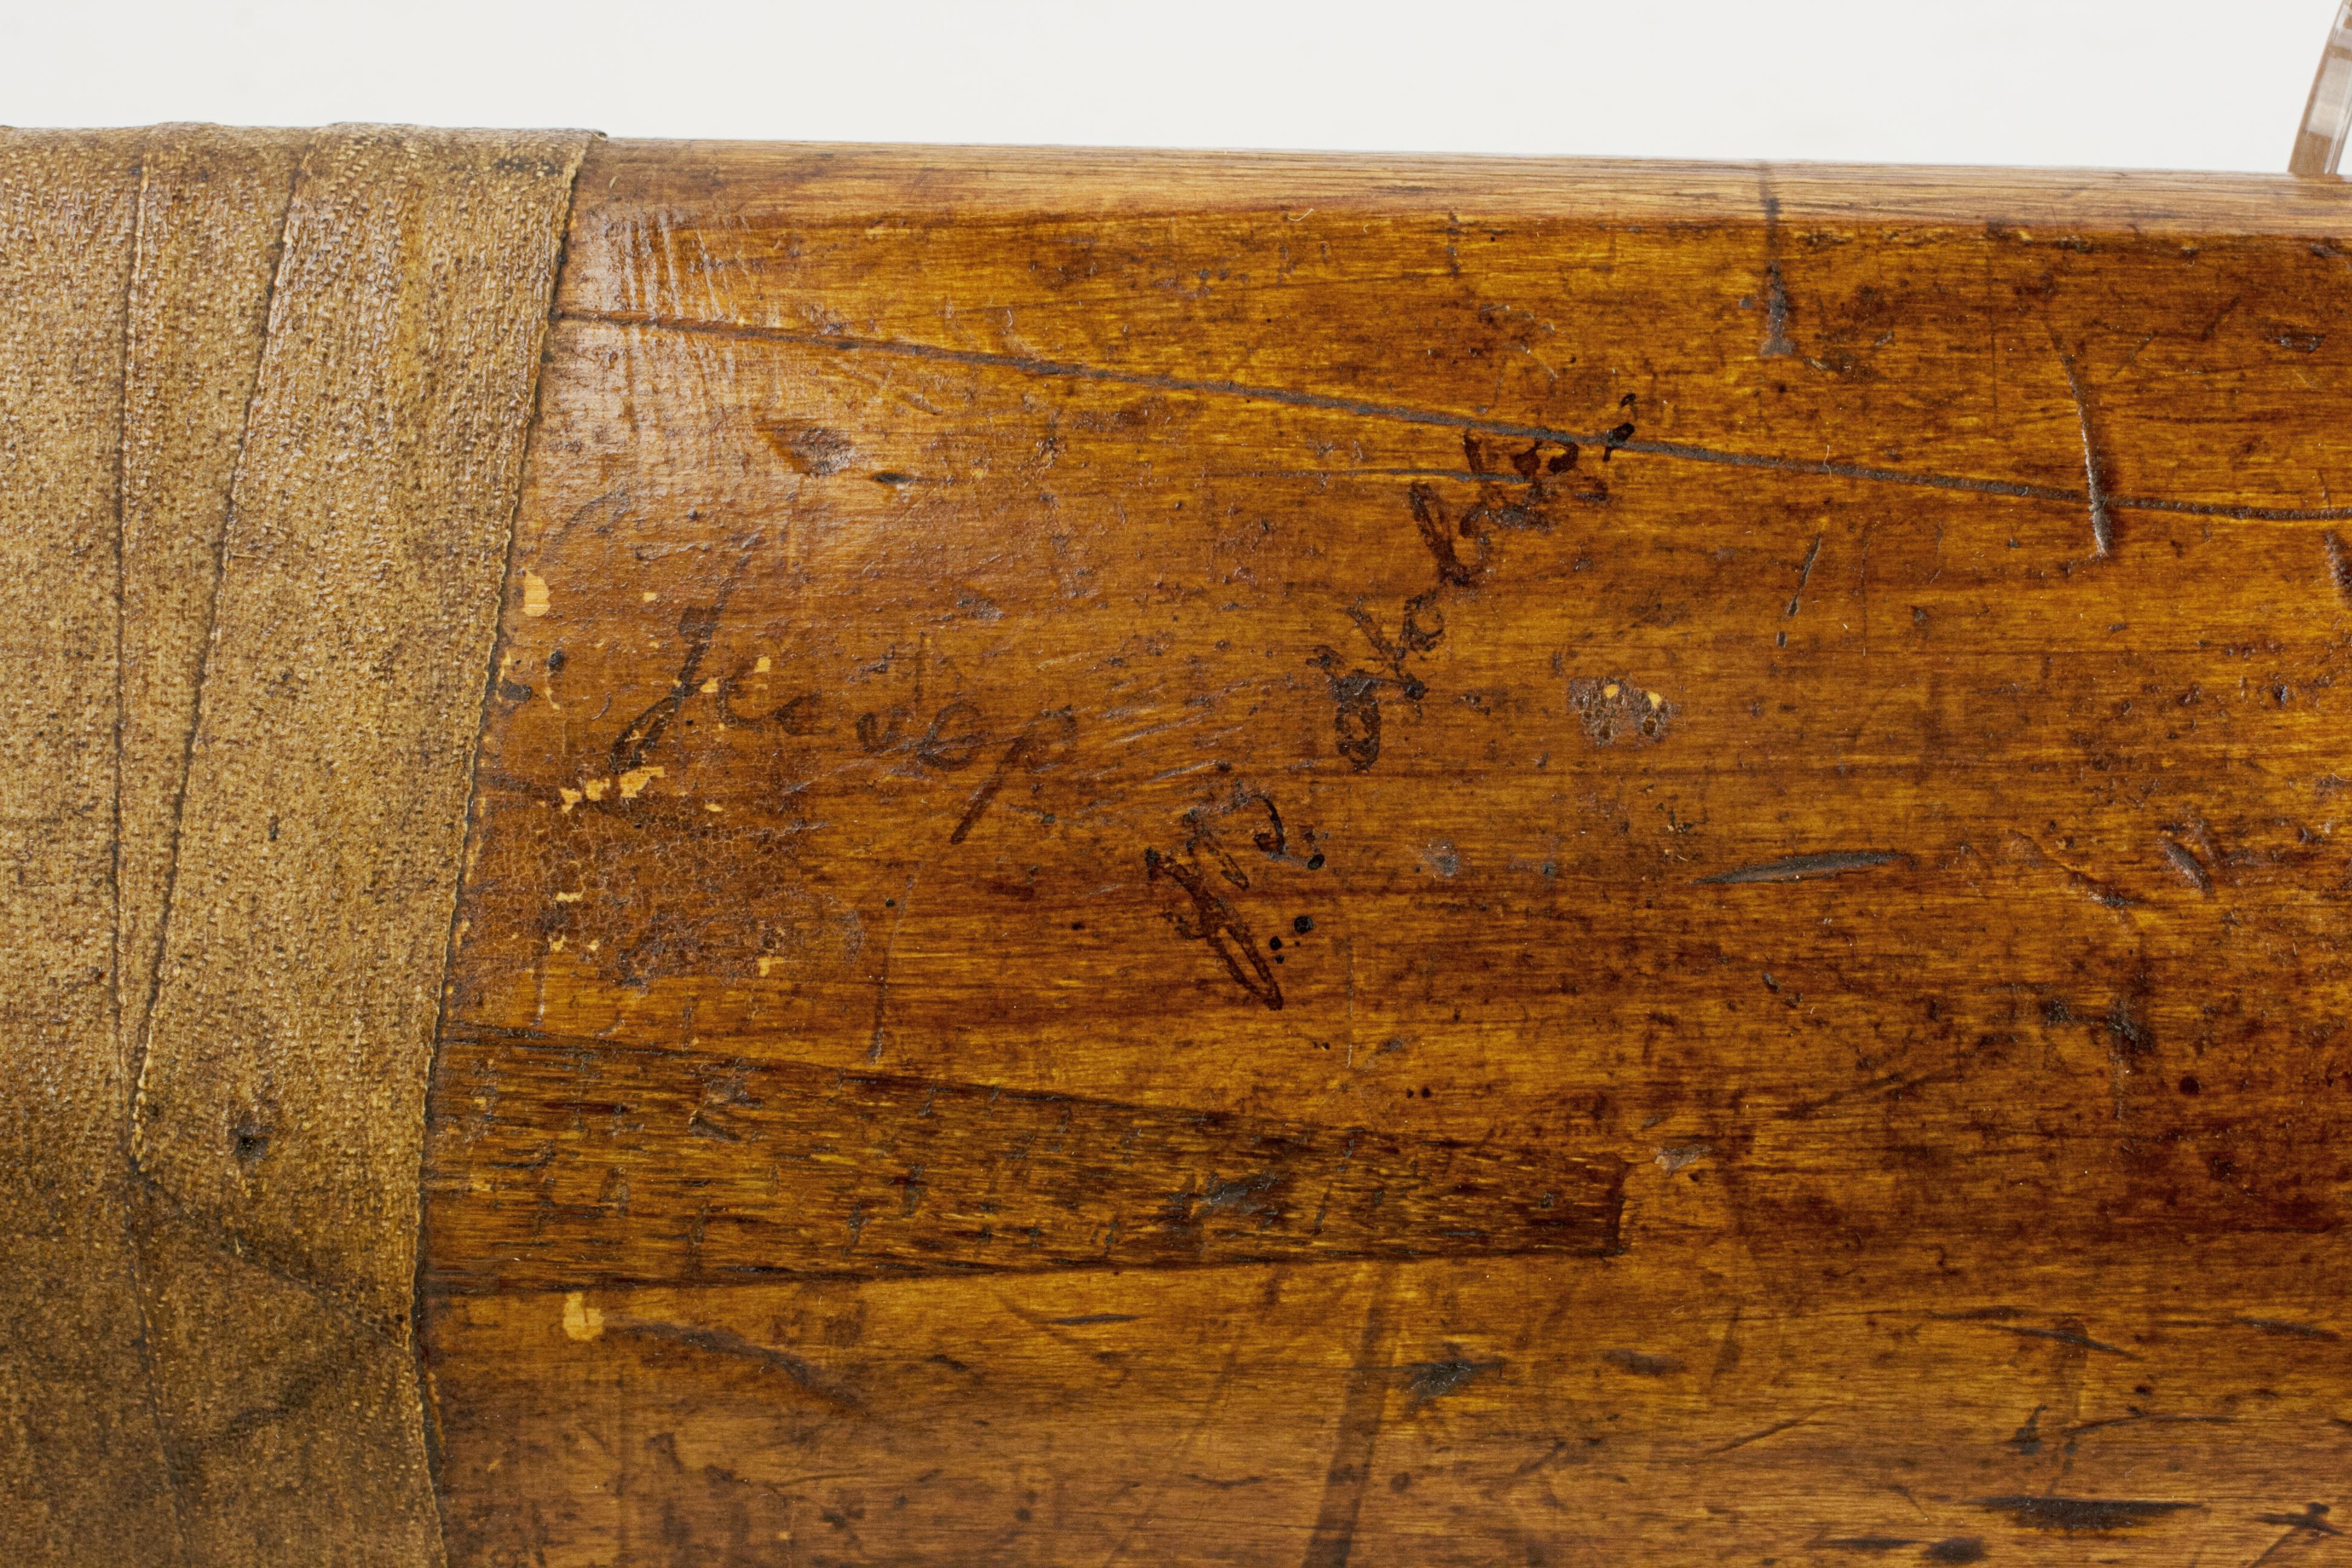 Autographed cricket bat, Jack Hobbs.
A fine W.A. Woof cricket bat 'The Gardiner'. The bat is in good condition with cord grip and the blade stamped 'W.A.WOOF, Cheltenham, 'The Gardiner', spring handle and a crown logo'. To the rear of the bat in